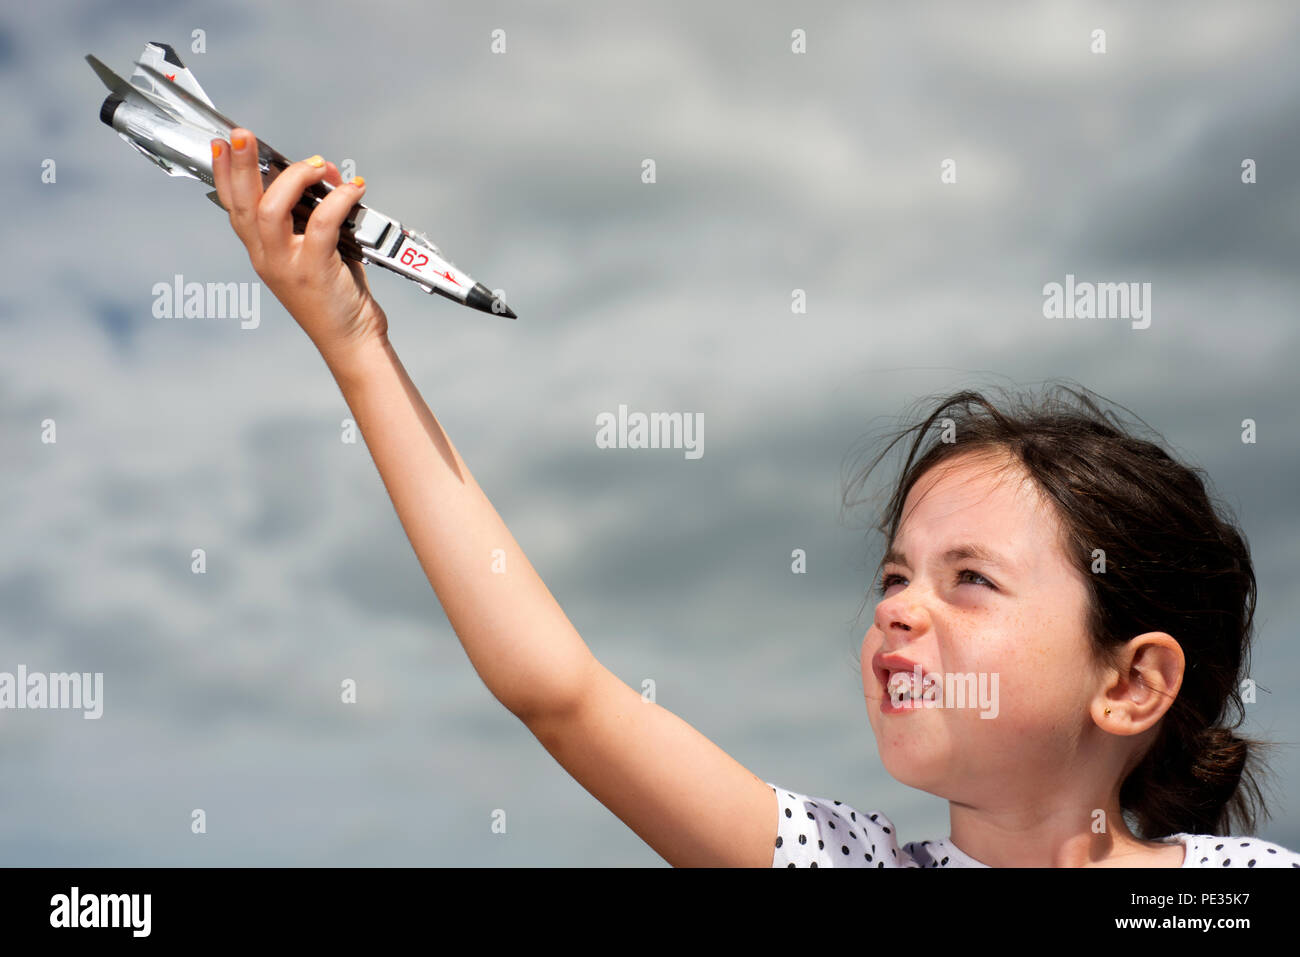 Young girl playing with a model aircraft Stock Photo